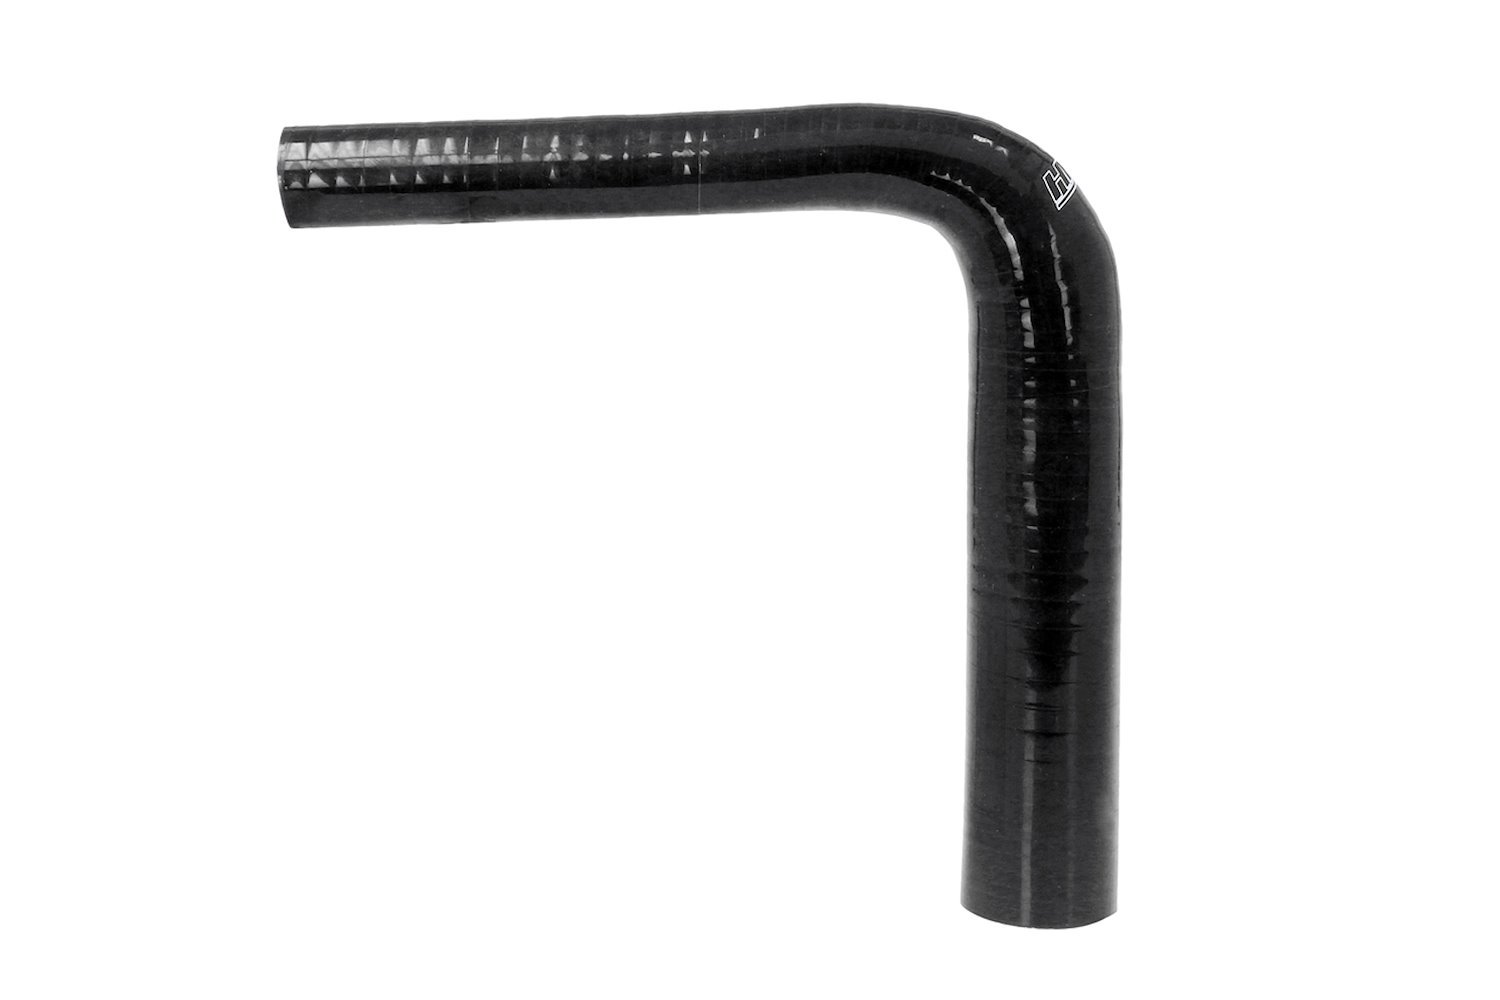 HTSER90-075-125-BLK Silicone 90-Degree Elbow Hose, High-Temp 4-Ply Reinforced, 3/4 in. - 1-1/4 in. ID, Black